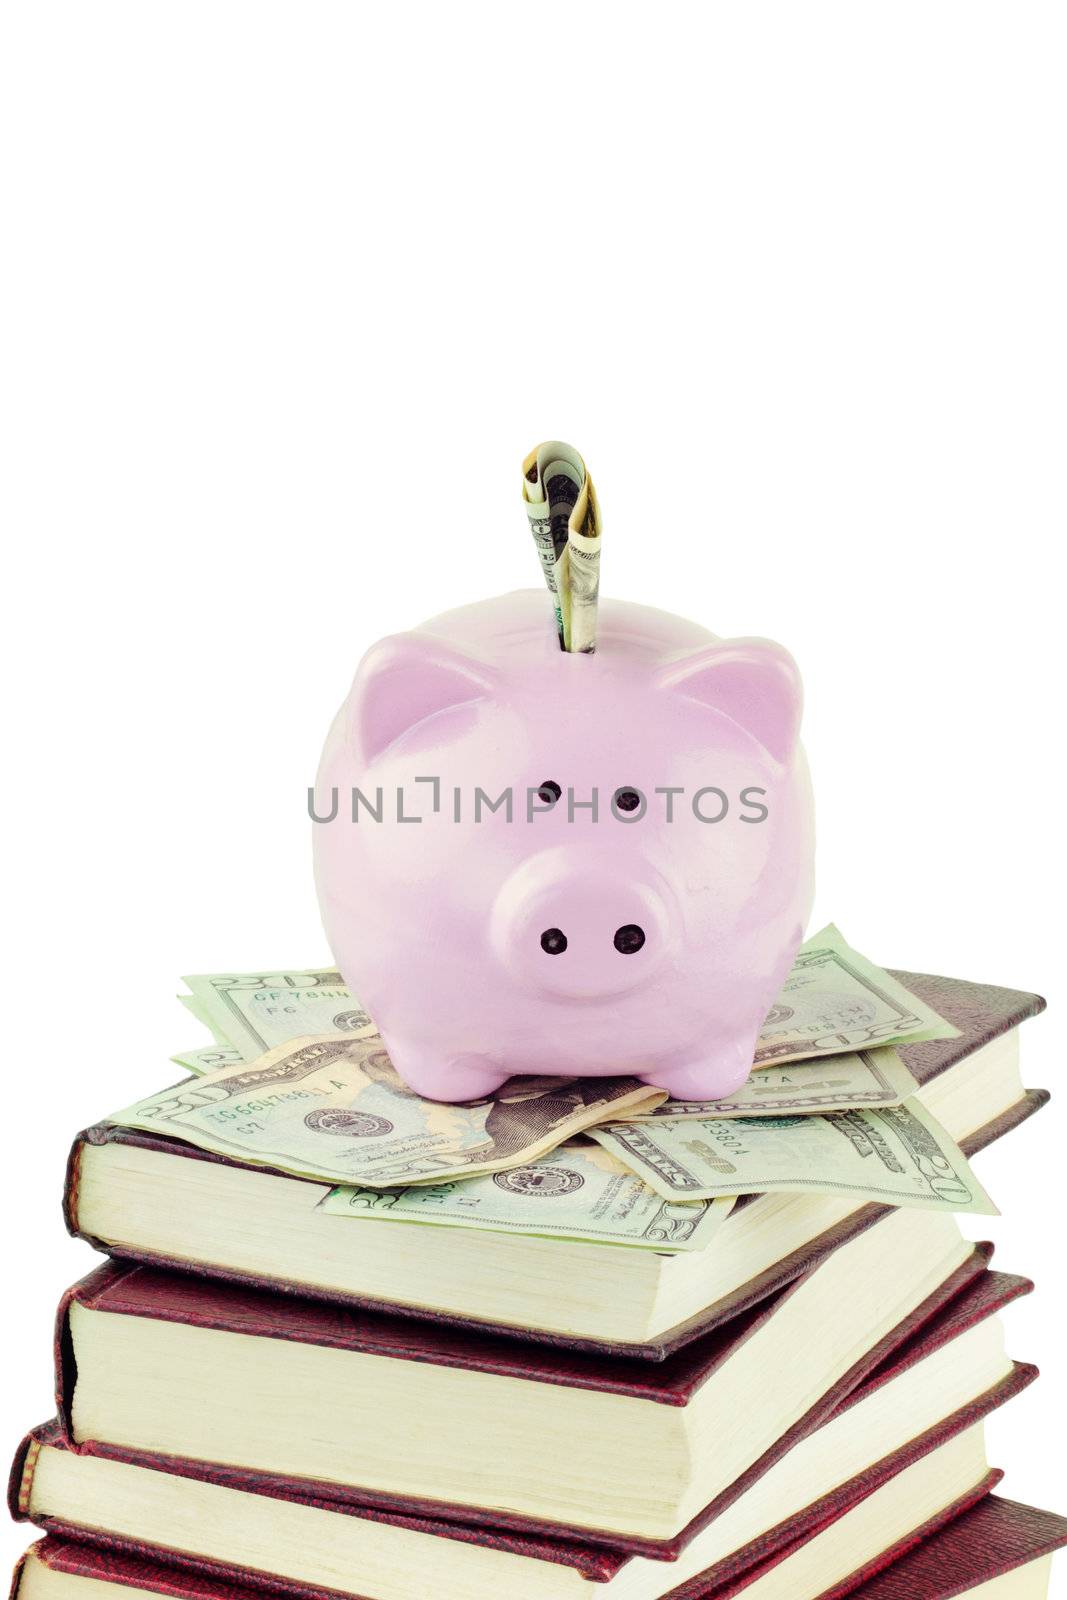 Ceramic piggy bank sitting on twenty dollar bills and a stack of books against a white background with copy space. 